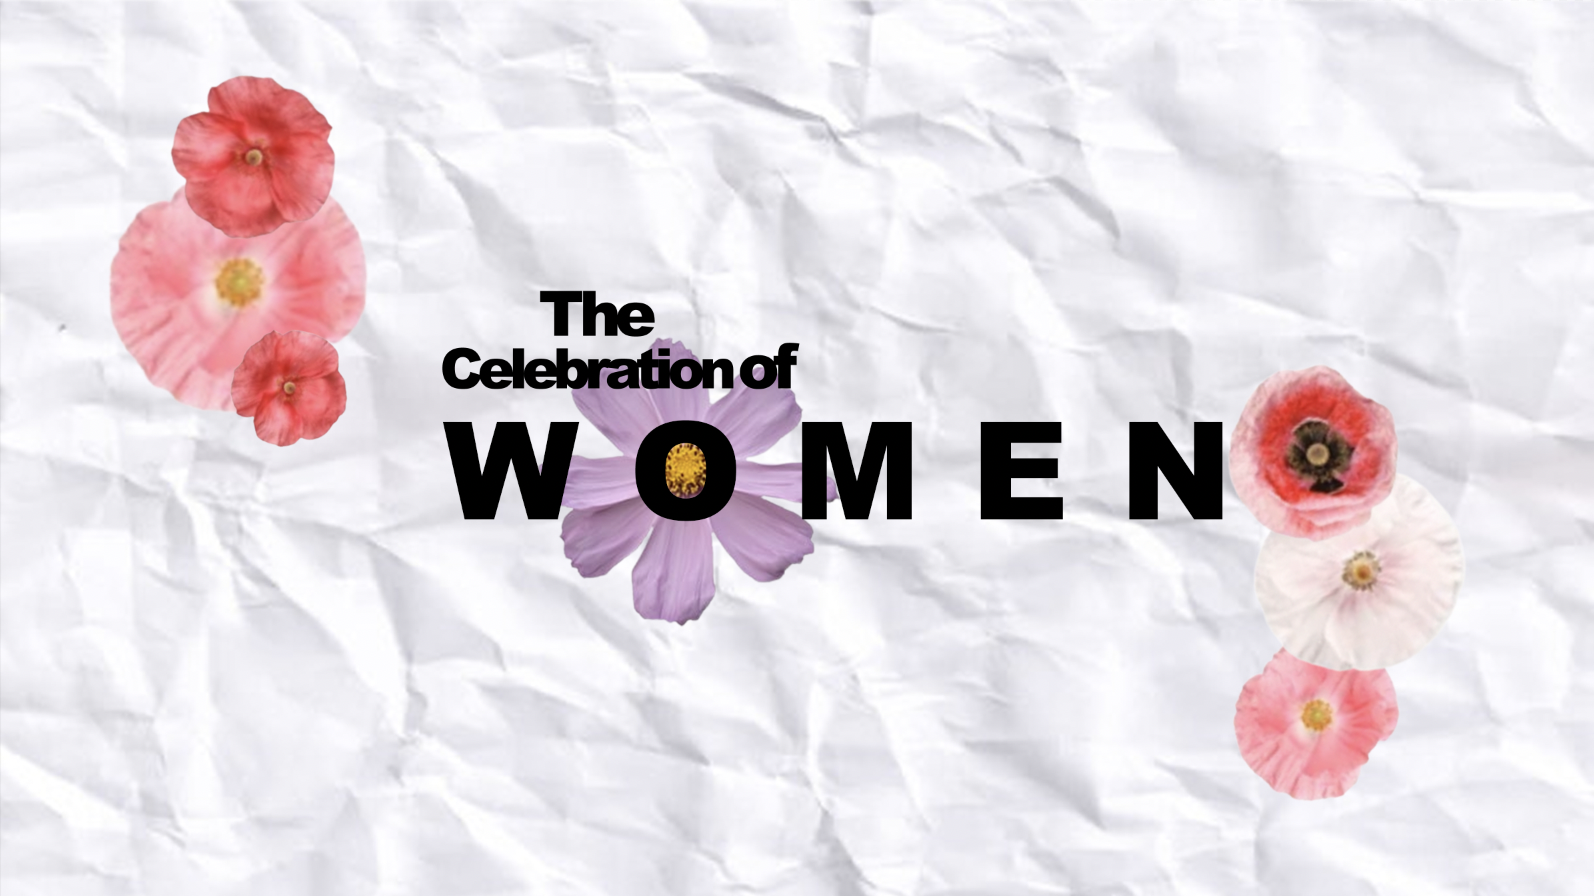 Wrinkled paper with “The Celebration of Women” in the middle with flowers surrounding it.